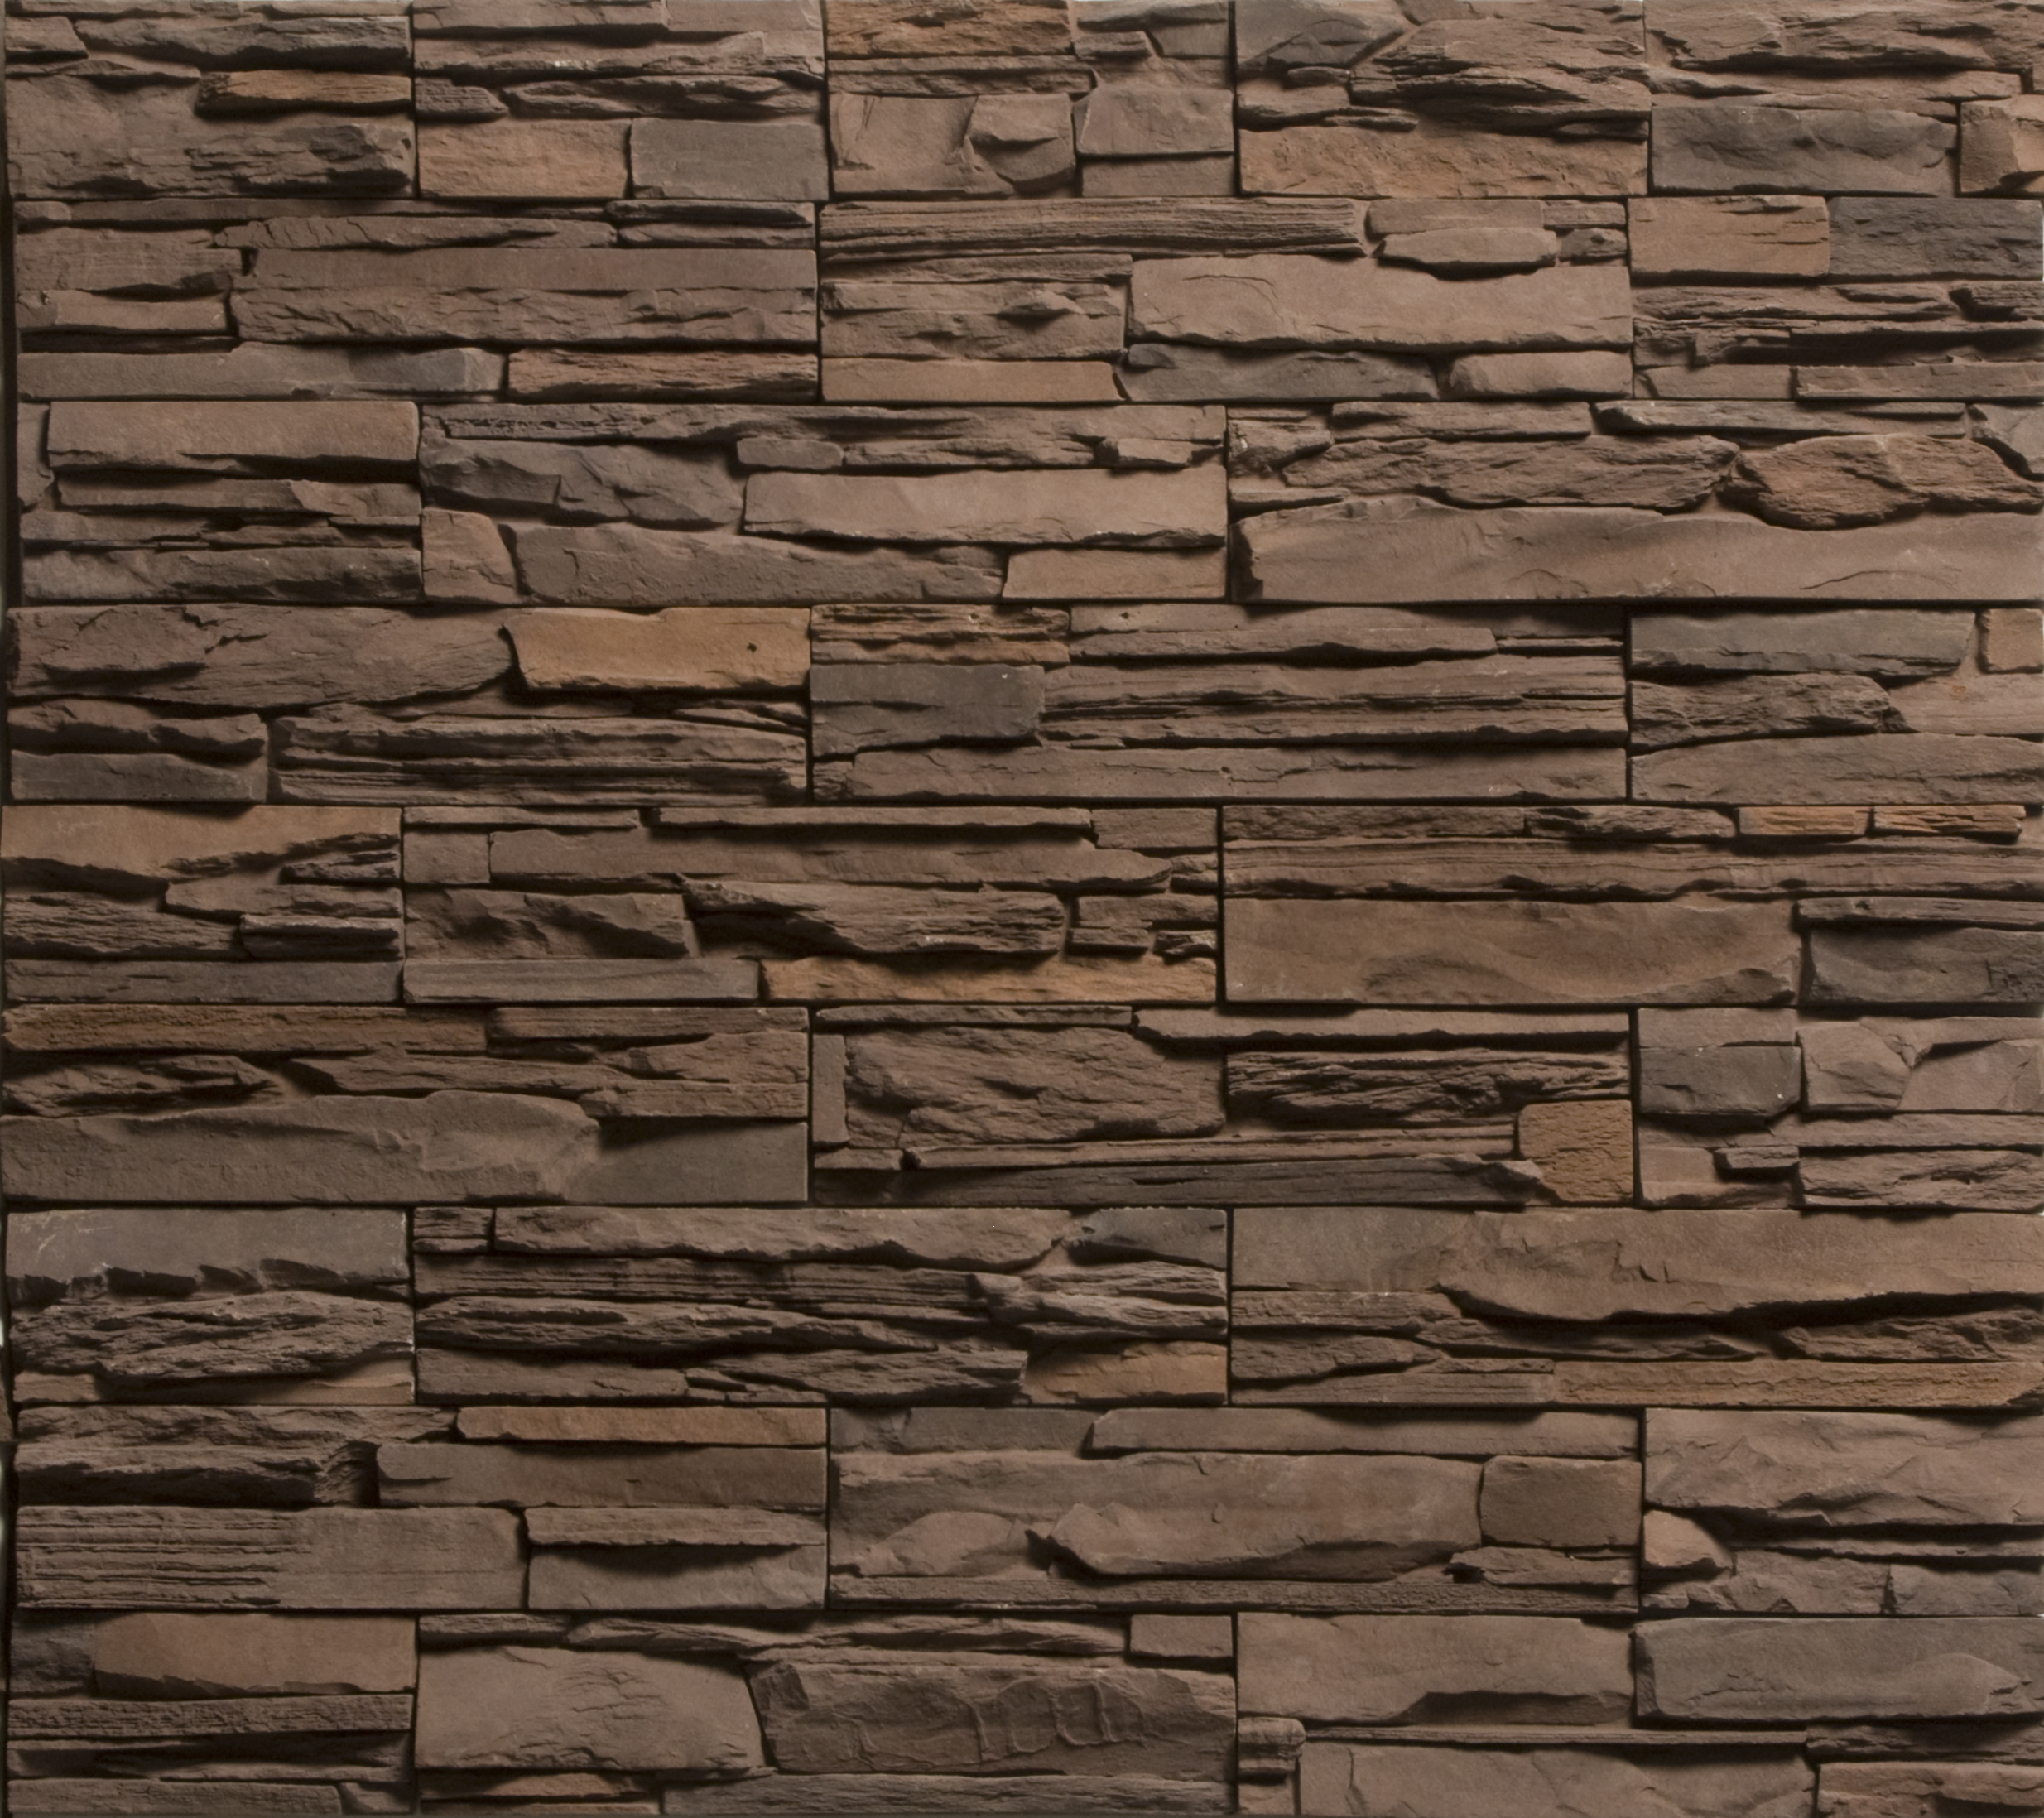  texture stone stone wall download background brown stone background